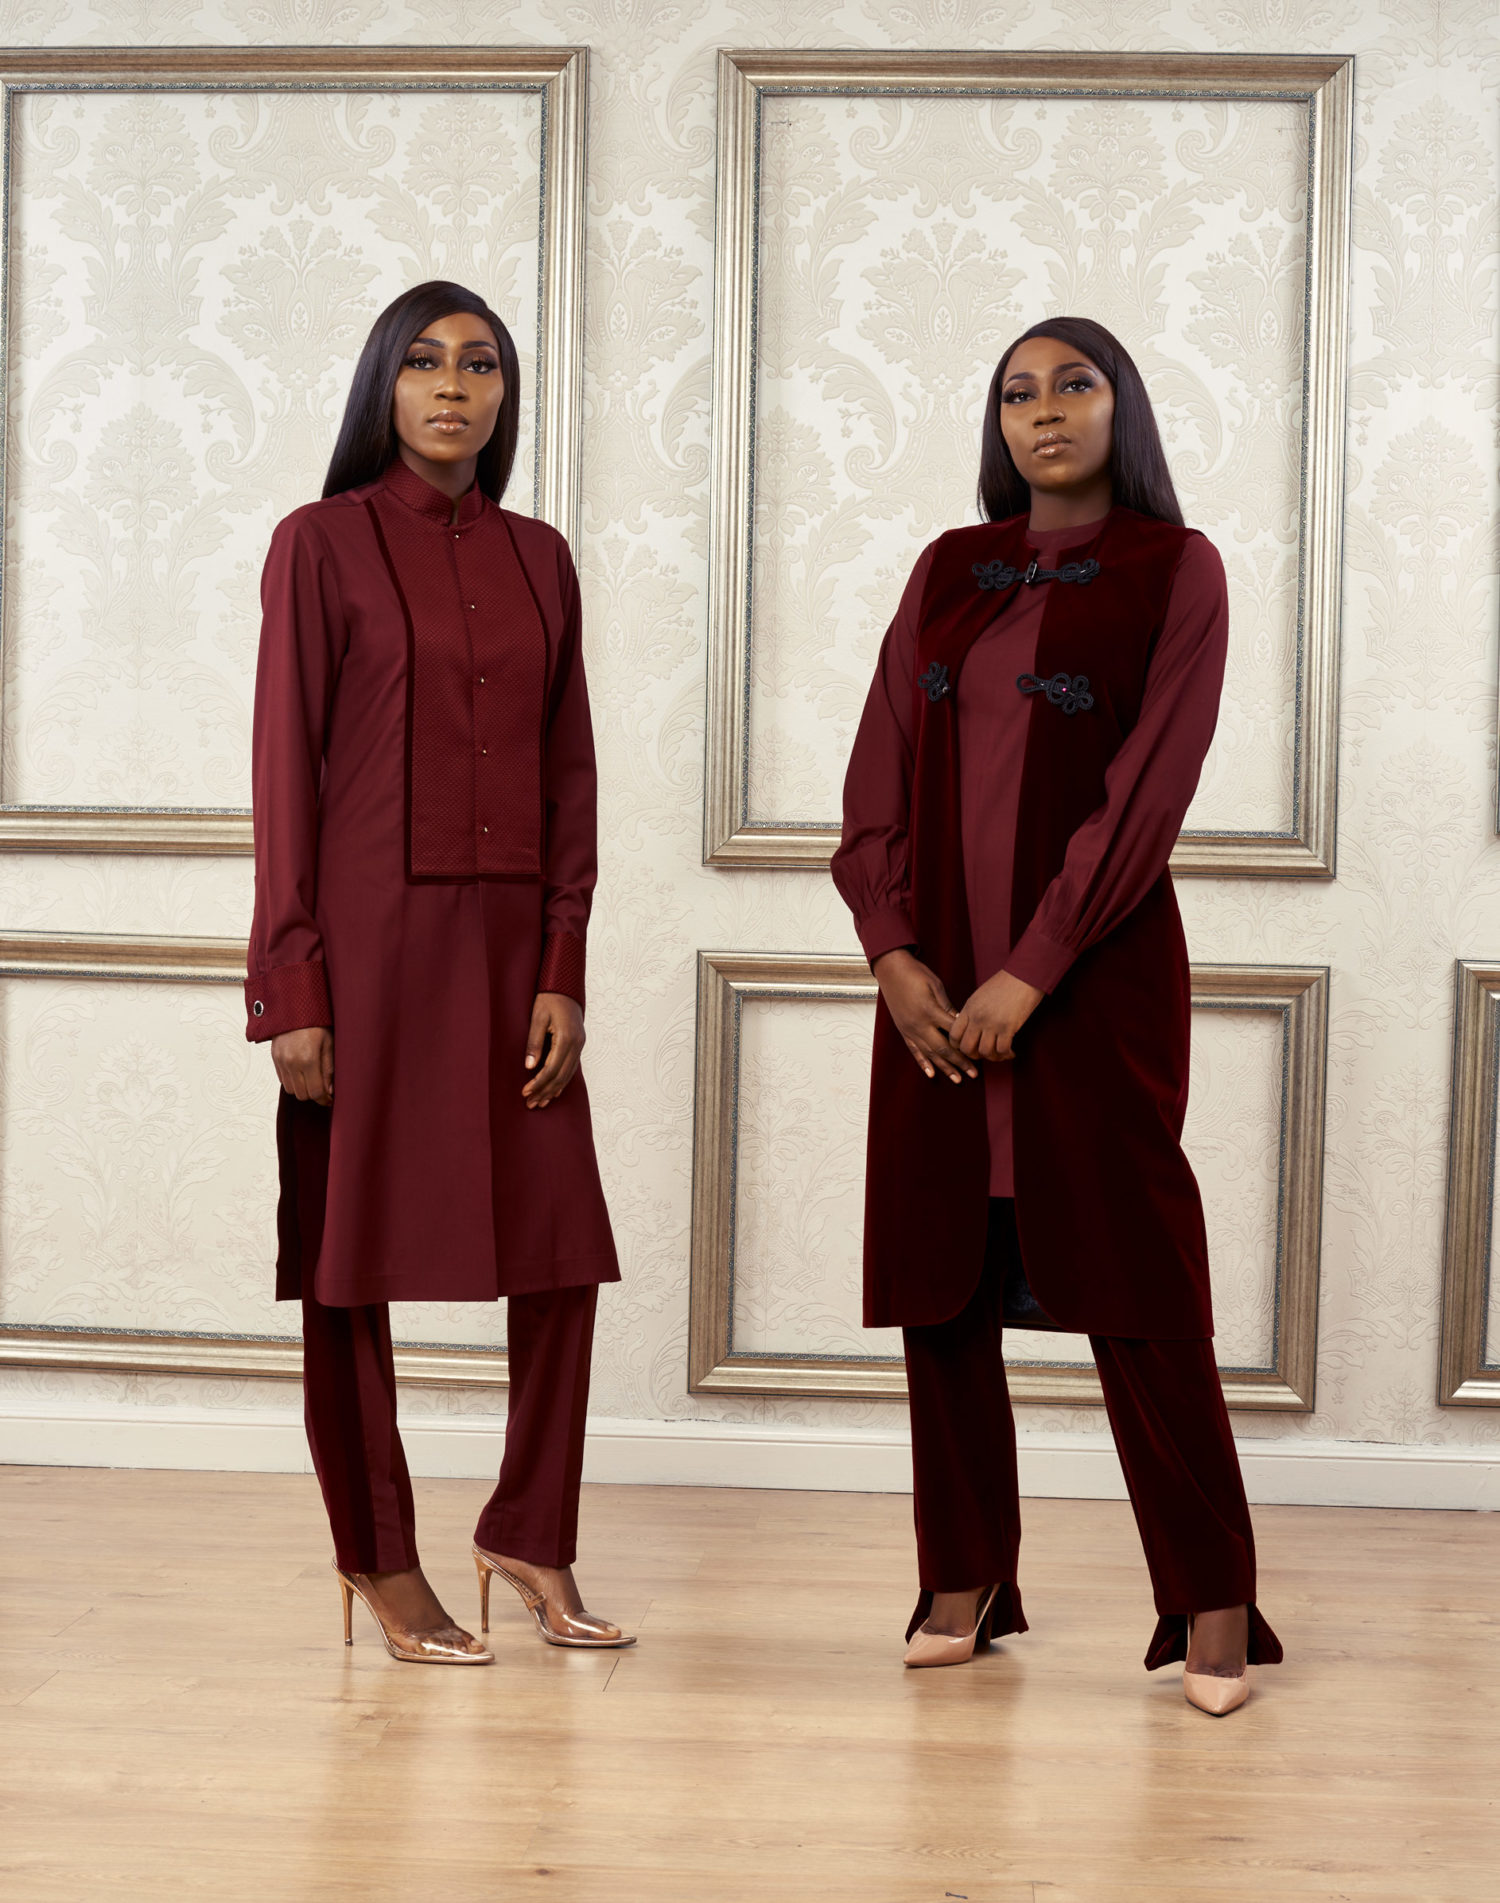 Mai Atafo’s New Womenswear Collection Was Inspired by Duality & Feminism